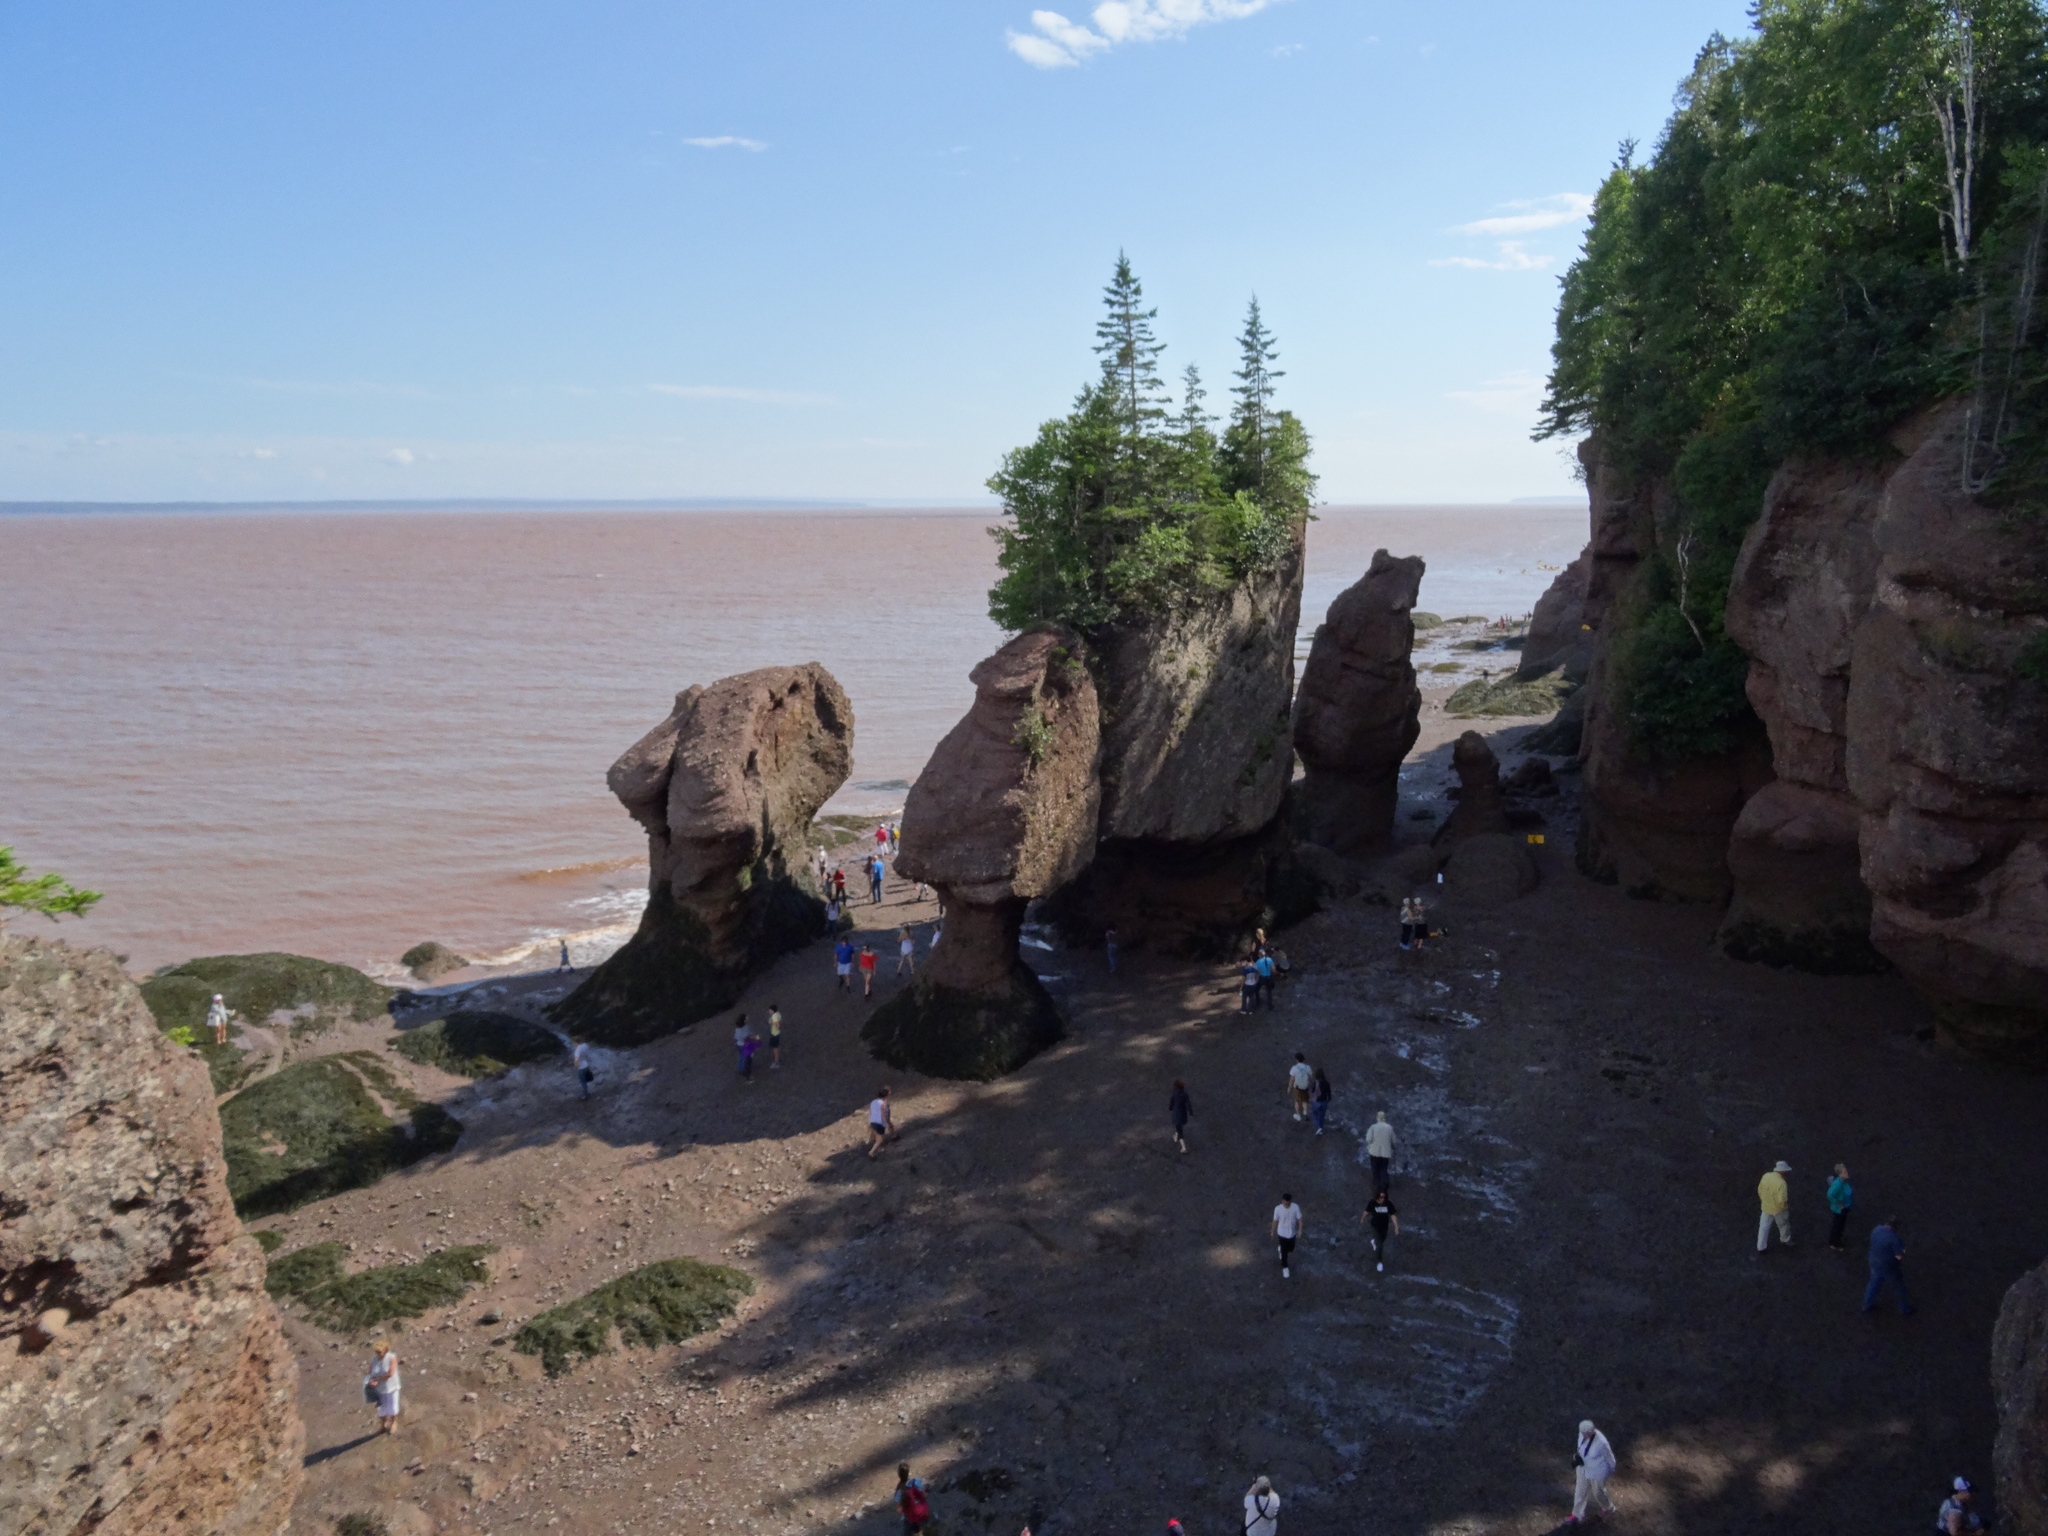 https://res.cloudinary.com/see-sight-tours/image/upload/v1581432178/Hopewell-rocks-secondary.jpg